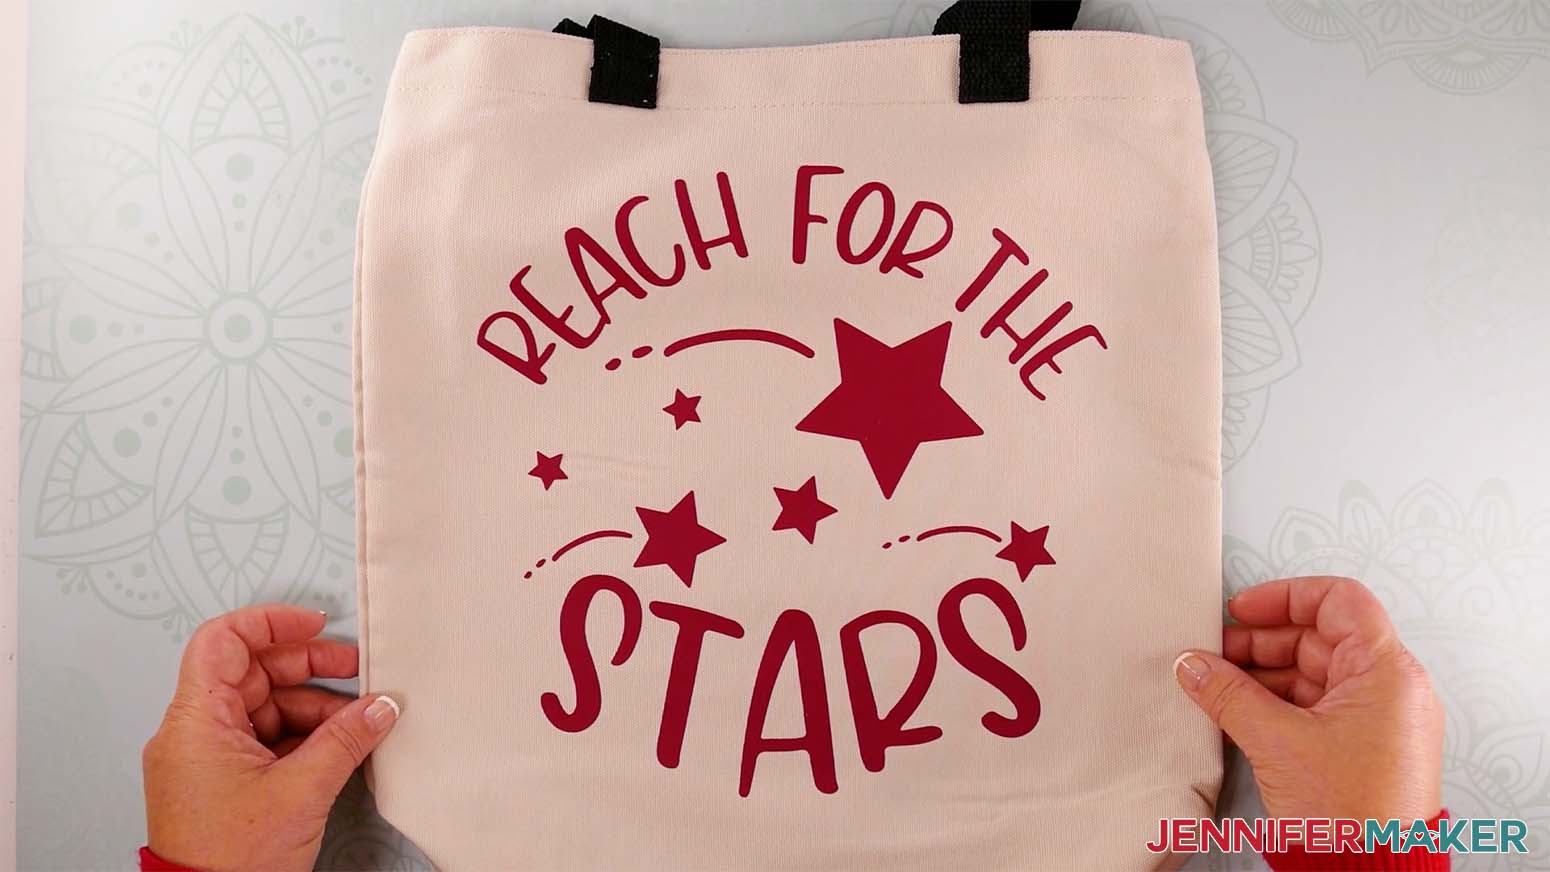 Image showing the completed tote bag with the iron on stars design.